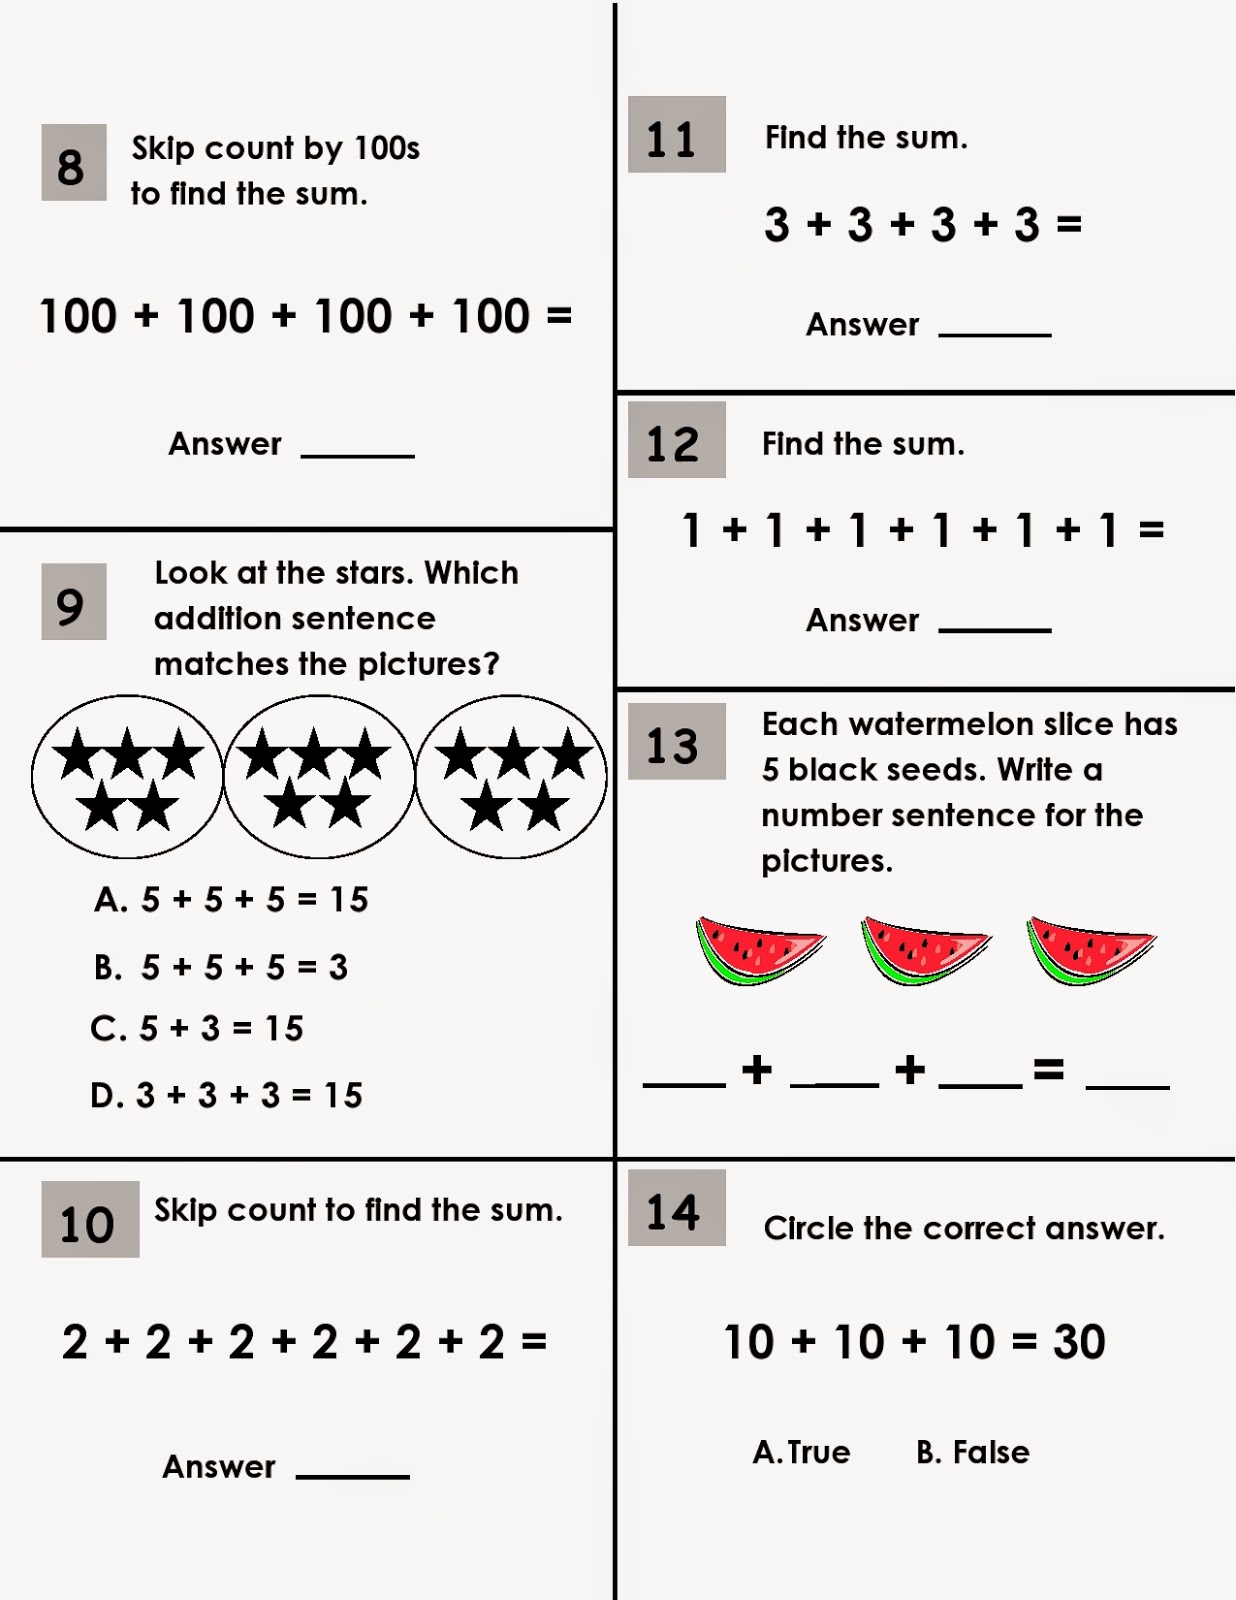 the-best-of-teacher-entrepreneurs-math-lesson-skip-counting-packet-2s-3s-5s-10s-and-100s